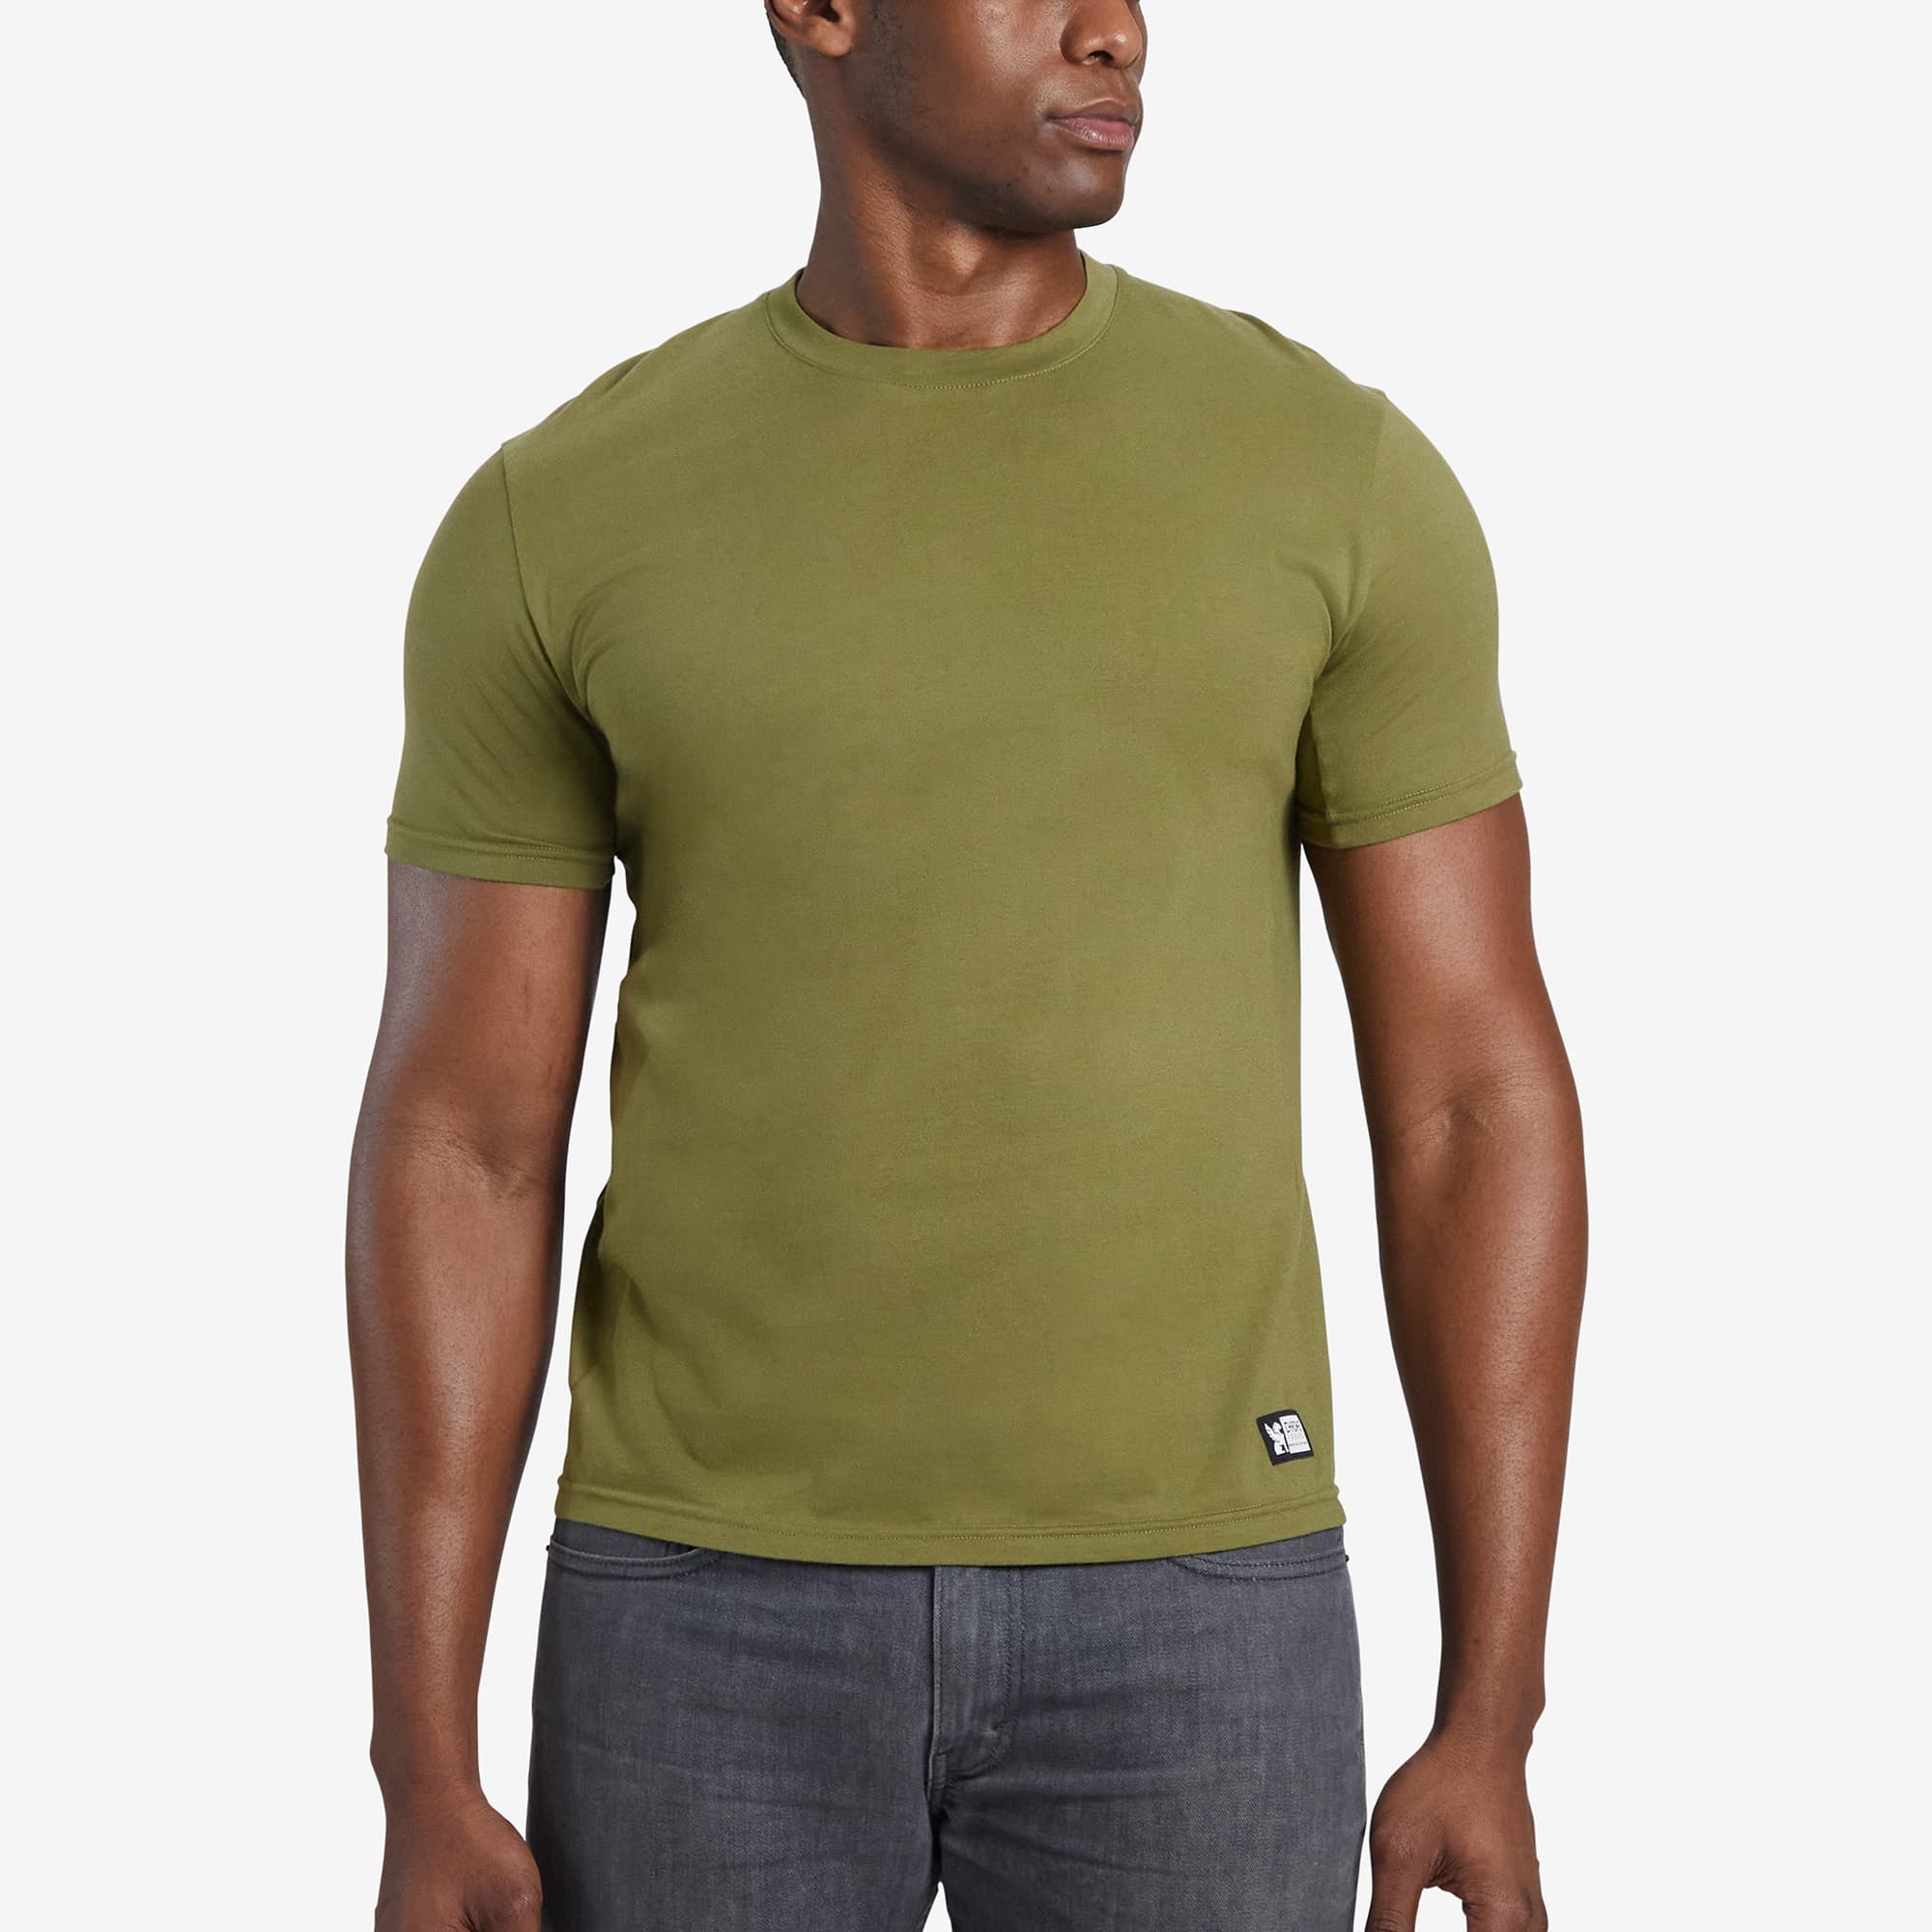 Men's Chrome basics T-shirt short sleeve in green worn by a man #color_olive branch